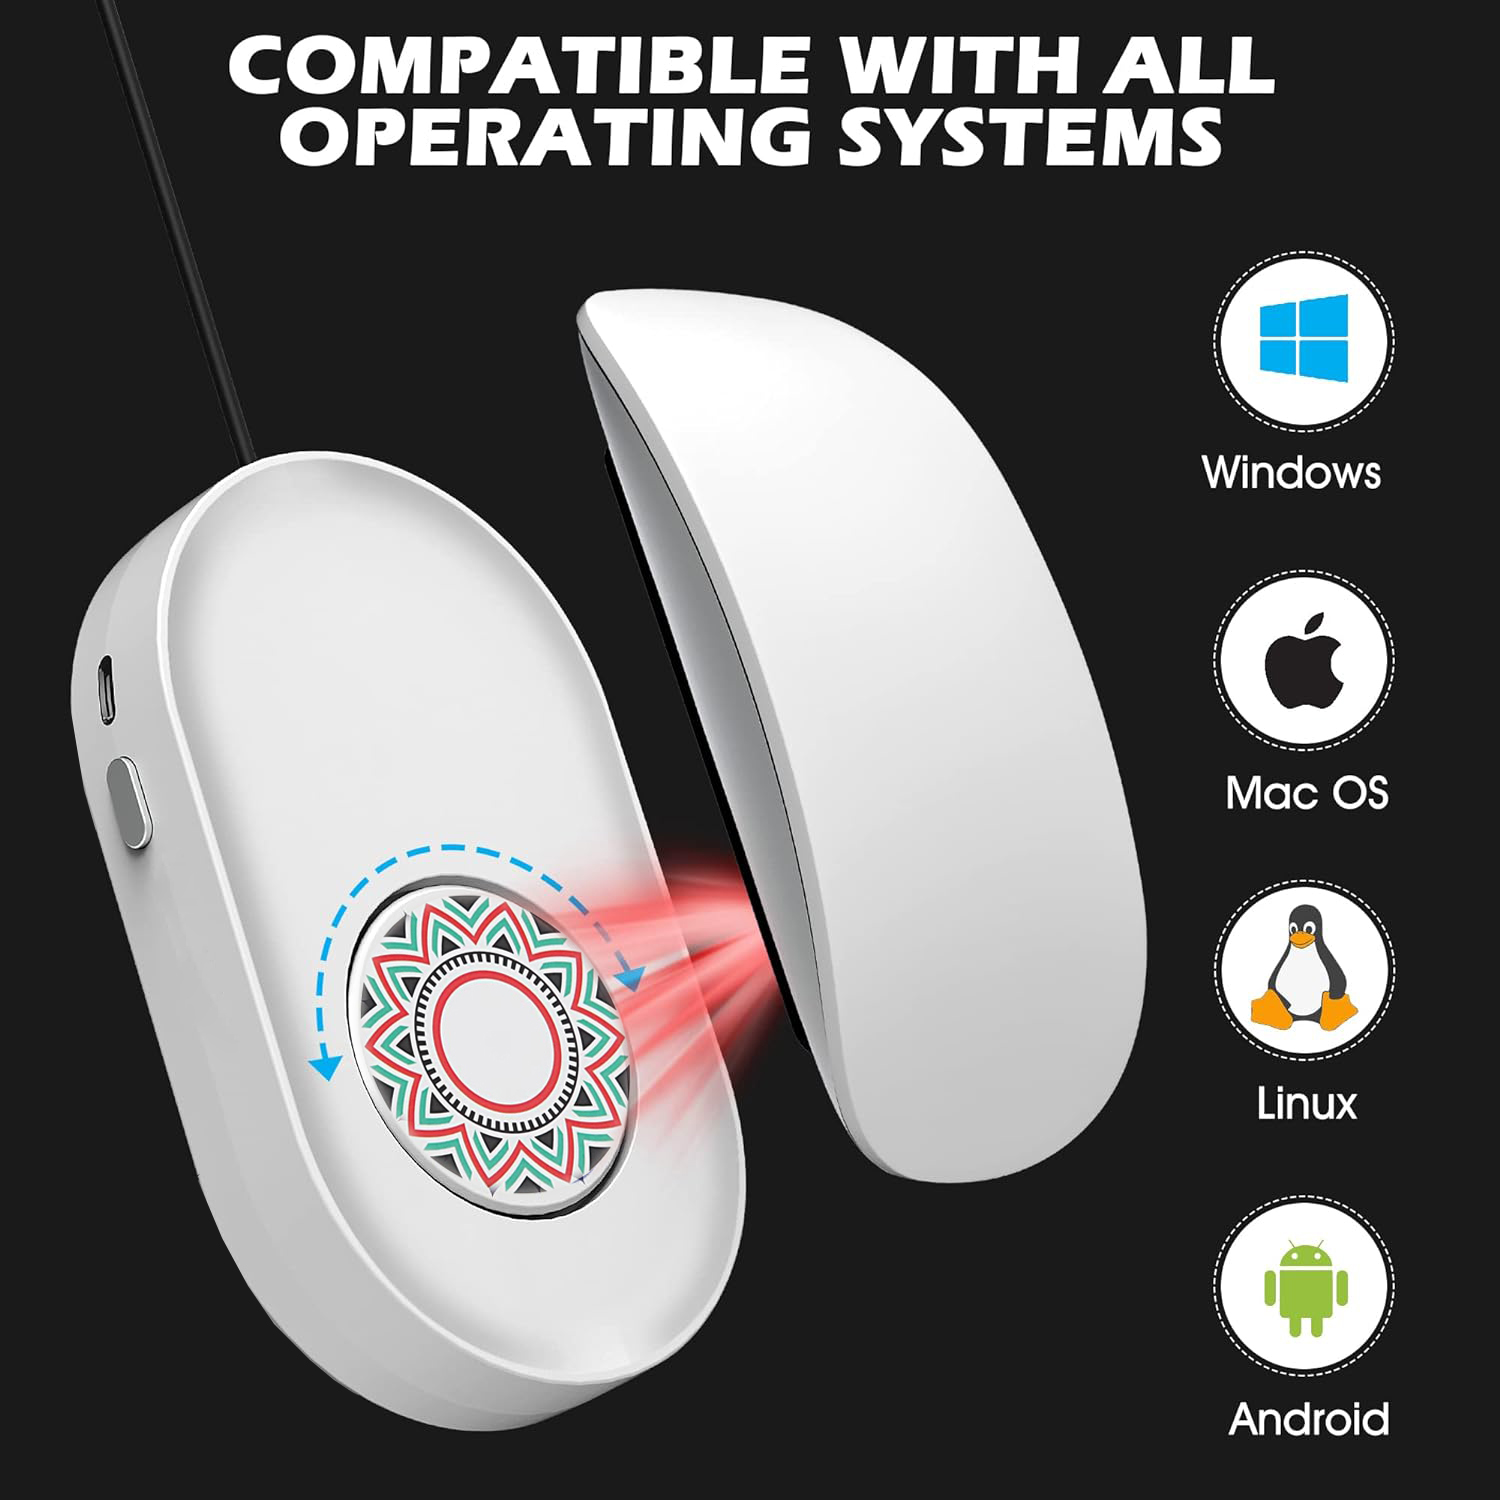 Undetectable-Mouse-Mover-Mouse-Jiggler-Keeps-PC-Active-No-Software-Randomly-Automatic-Driver-Free-Prevents-Computer-Laptops-From-Sleeping-Modes-41